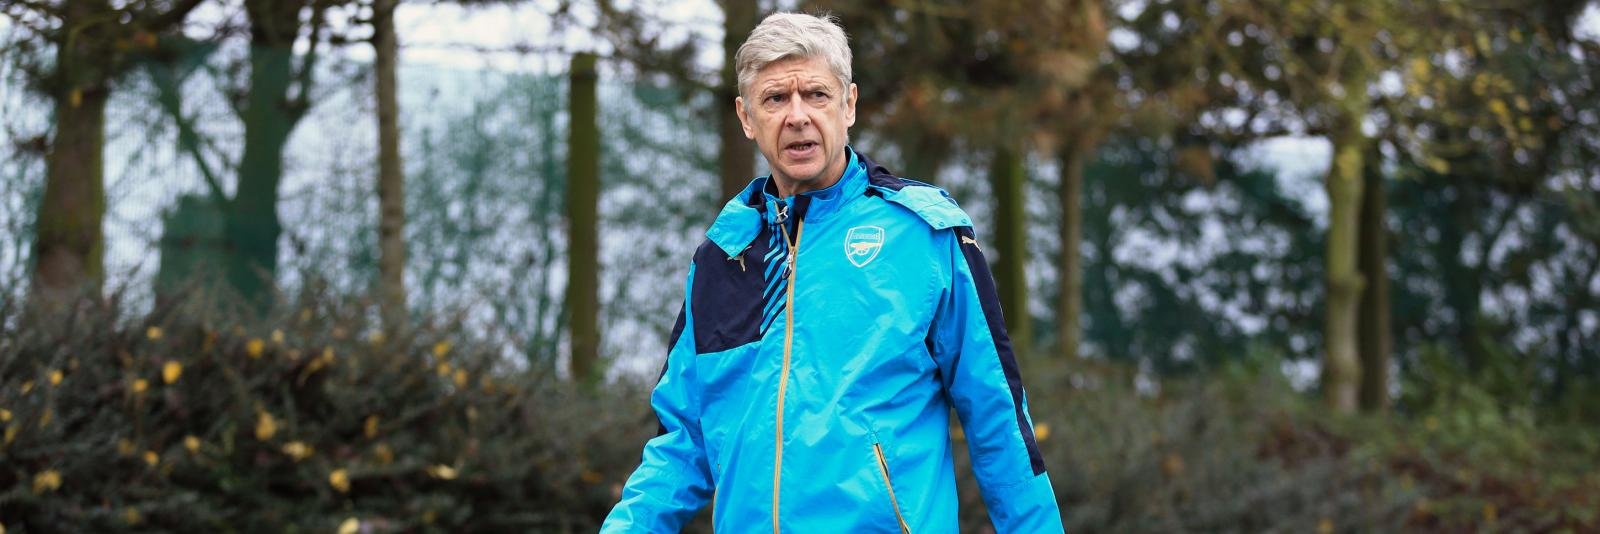 Arsenal outcast lined up for Ligue 1 loan move